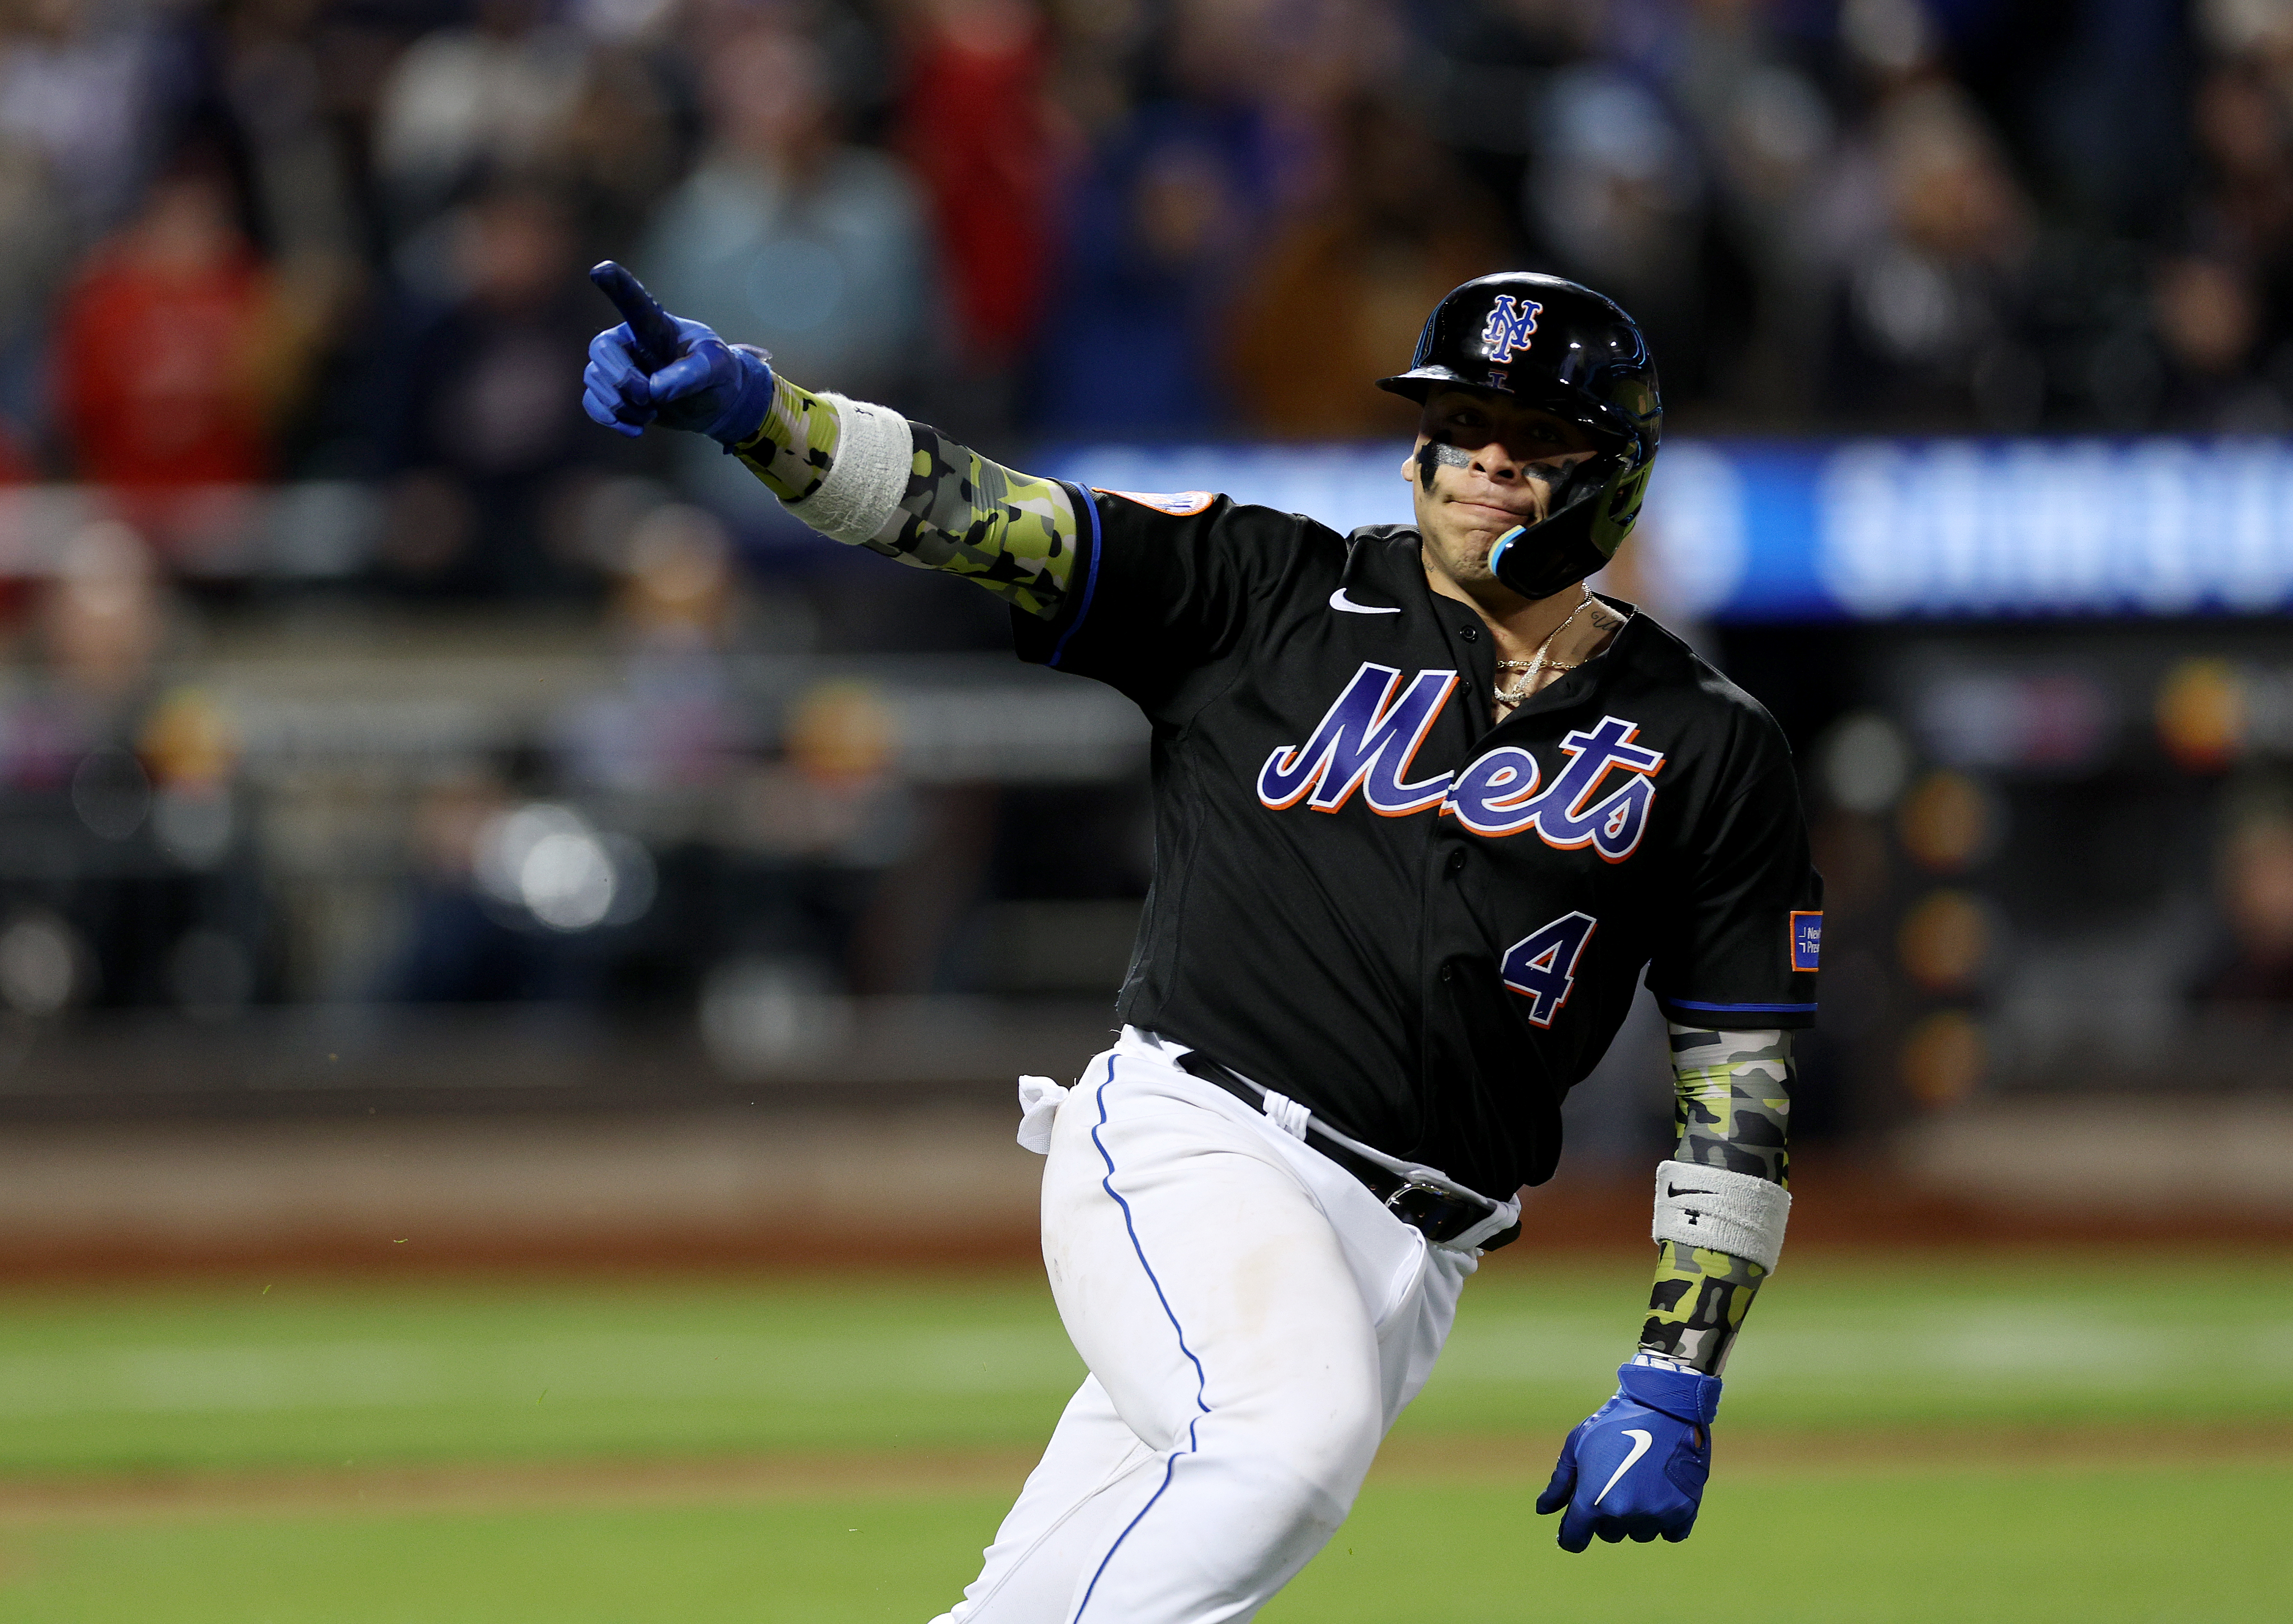 Francisco Alvarez of the New York Mets celebrates his single in the 10th inning against the Cleveland Guardians at Citi Field on May 19, 2023 in the Flushing neighborhood of the Queens borough of New York City.